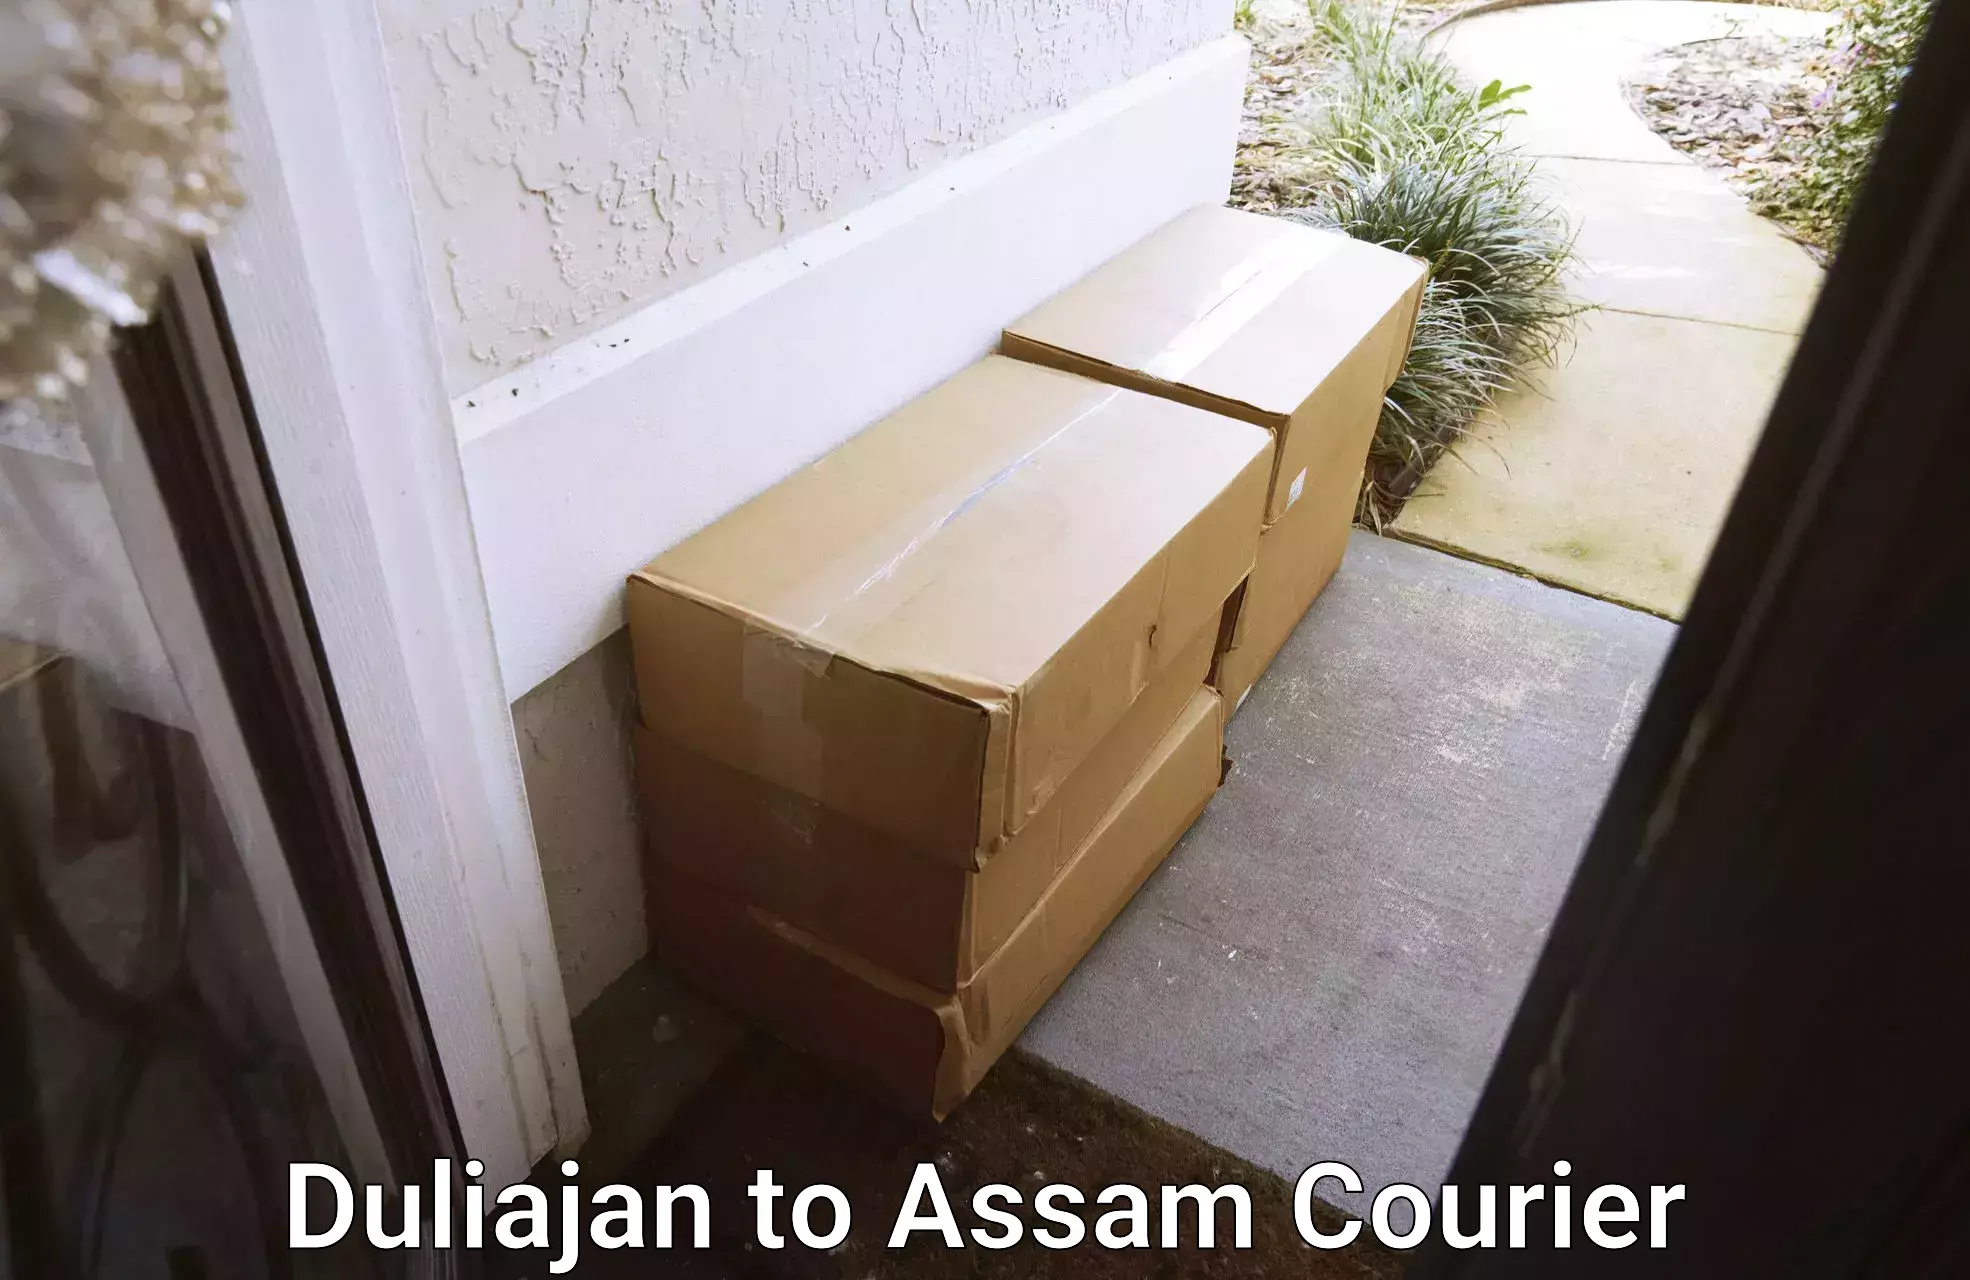 Large package courier Duliajan to Dibrugarh